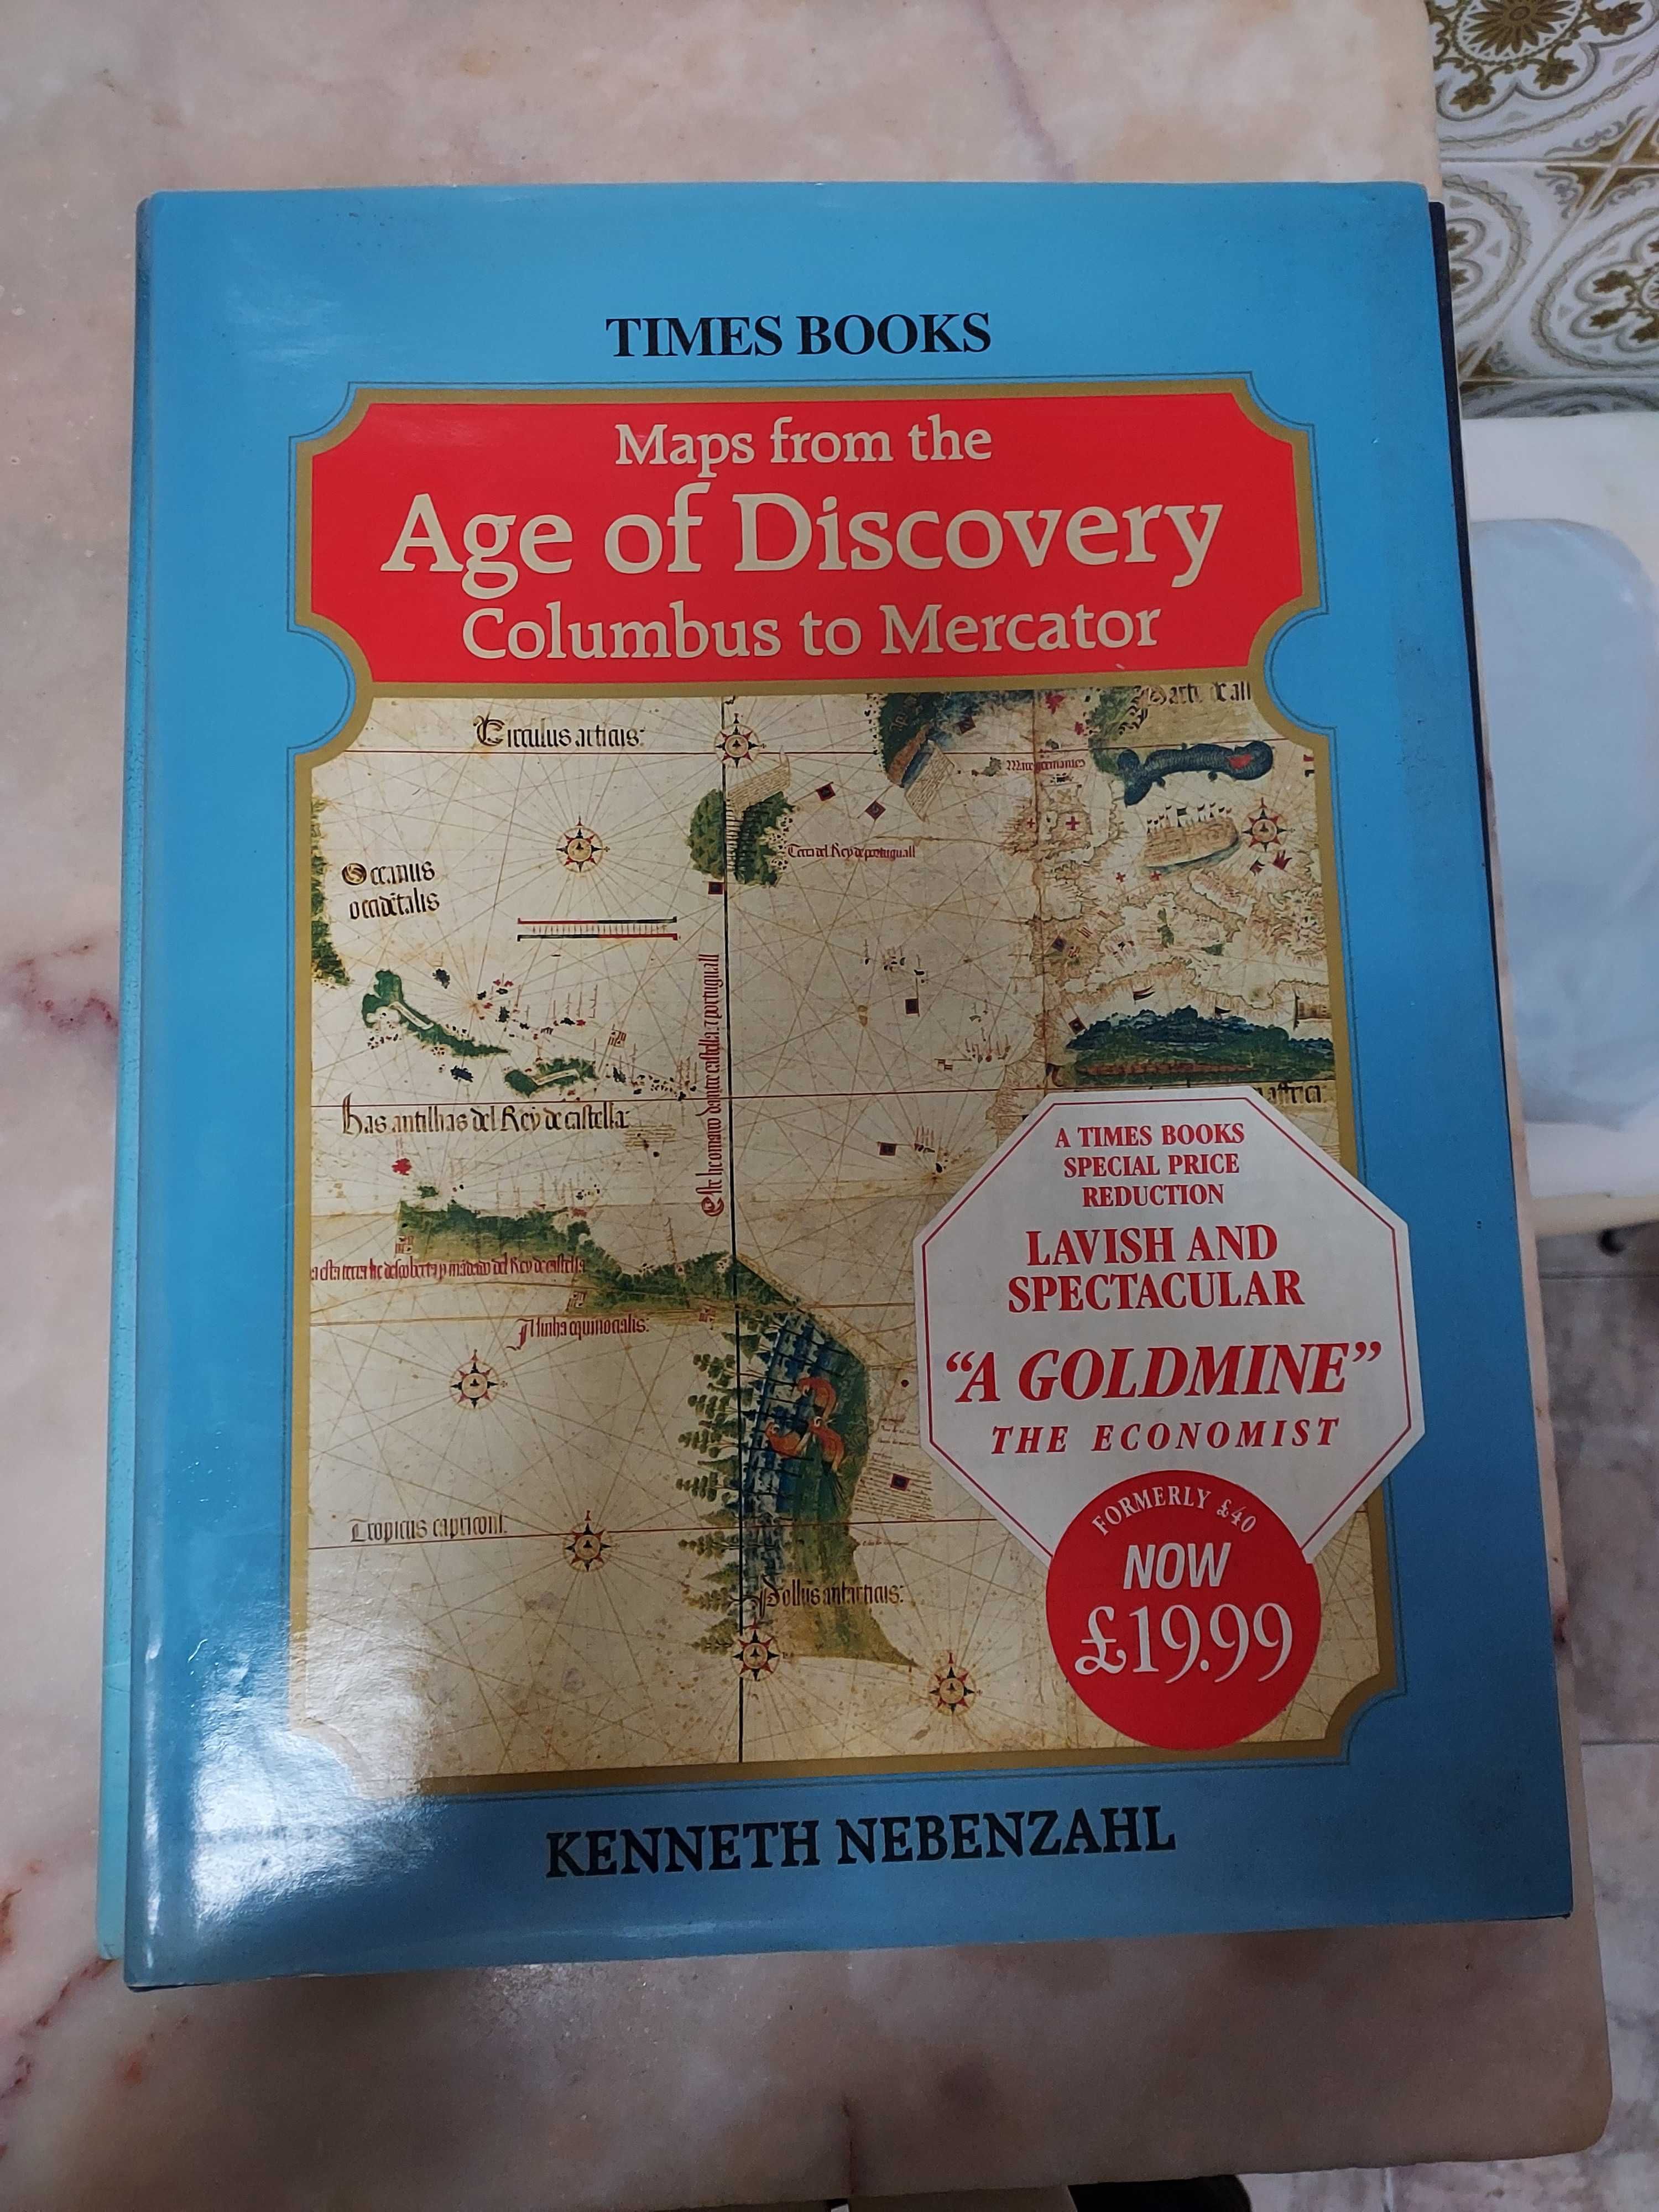 Maps from the Age of Discovery - 5 Fotos - Mapas